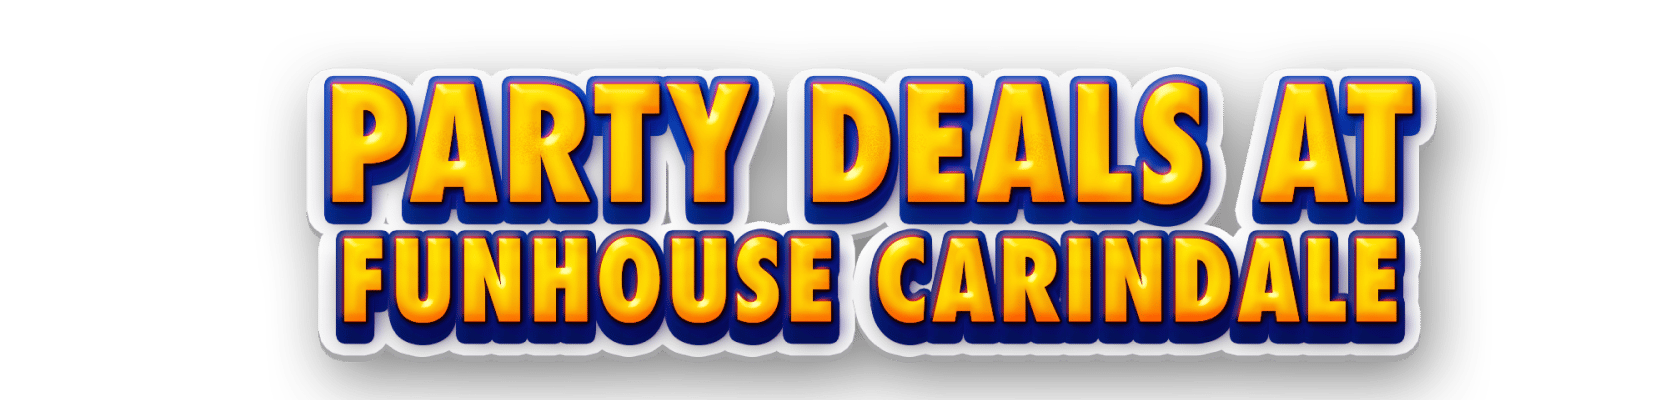 Party deals at funhouse carindale